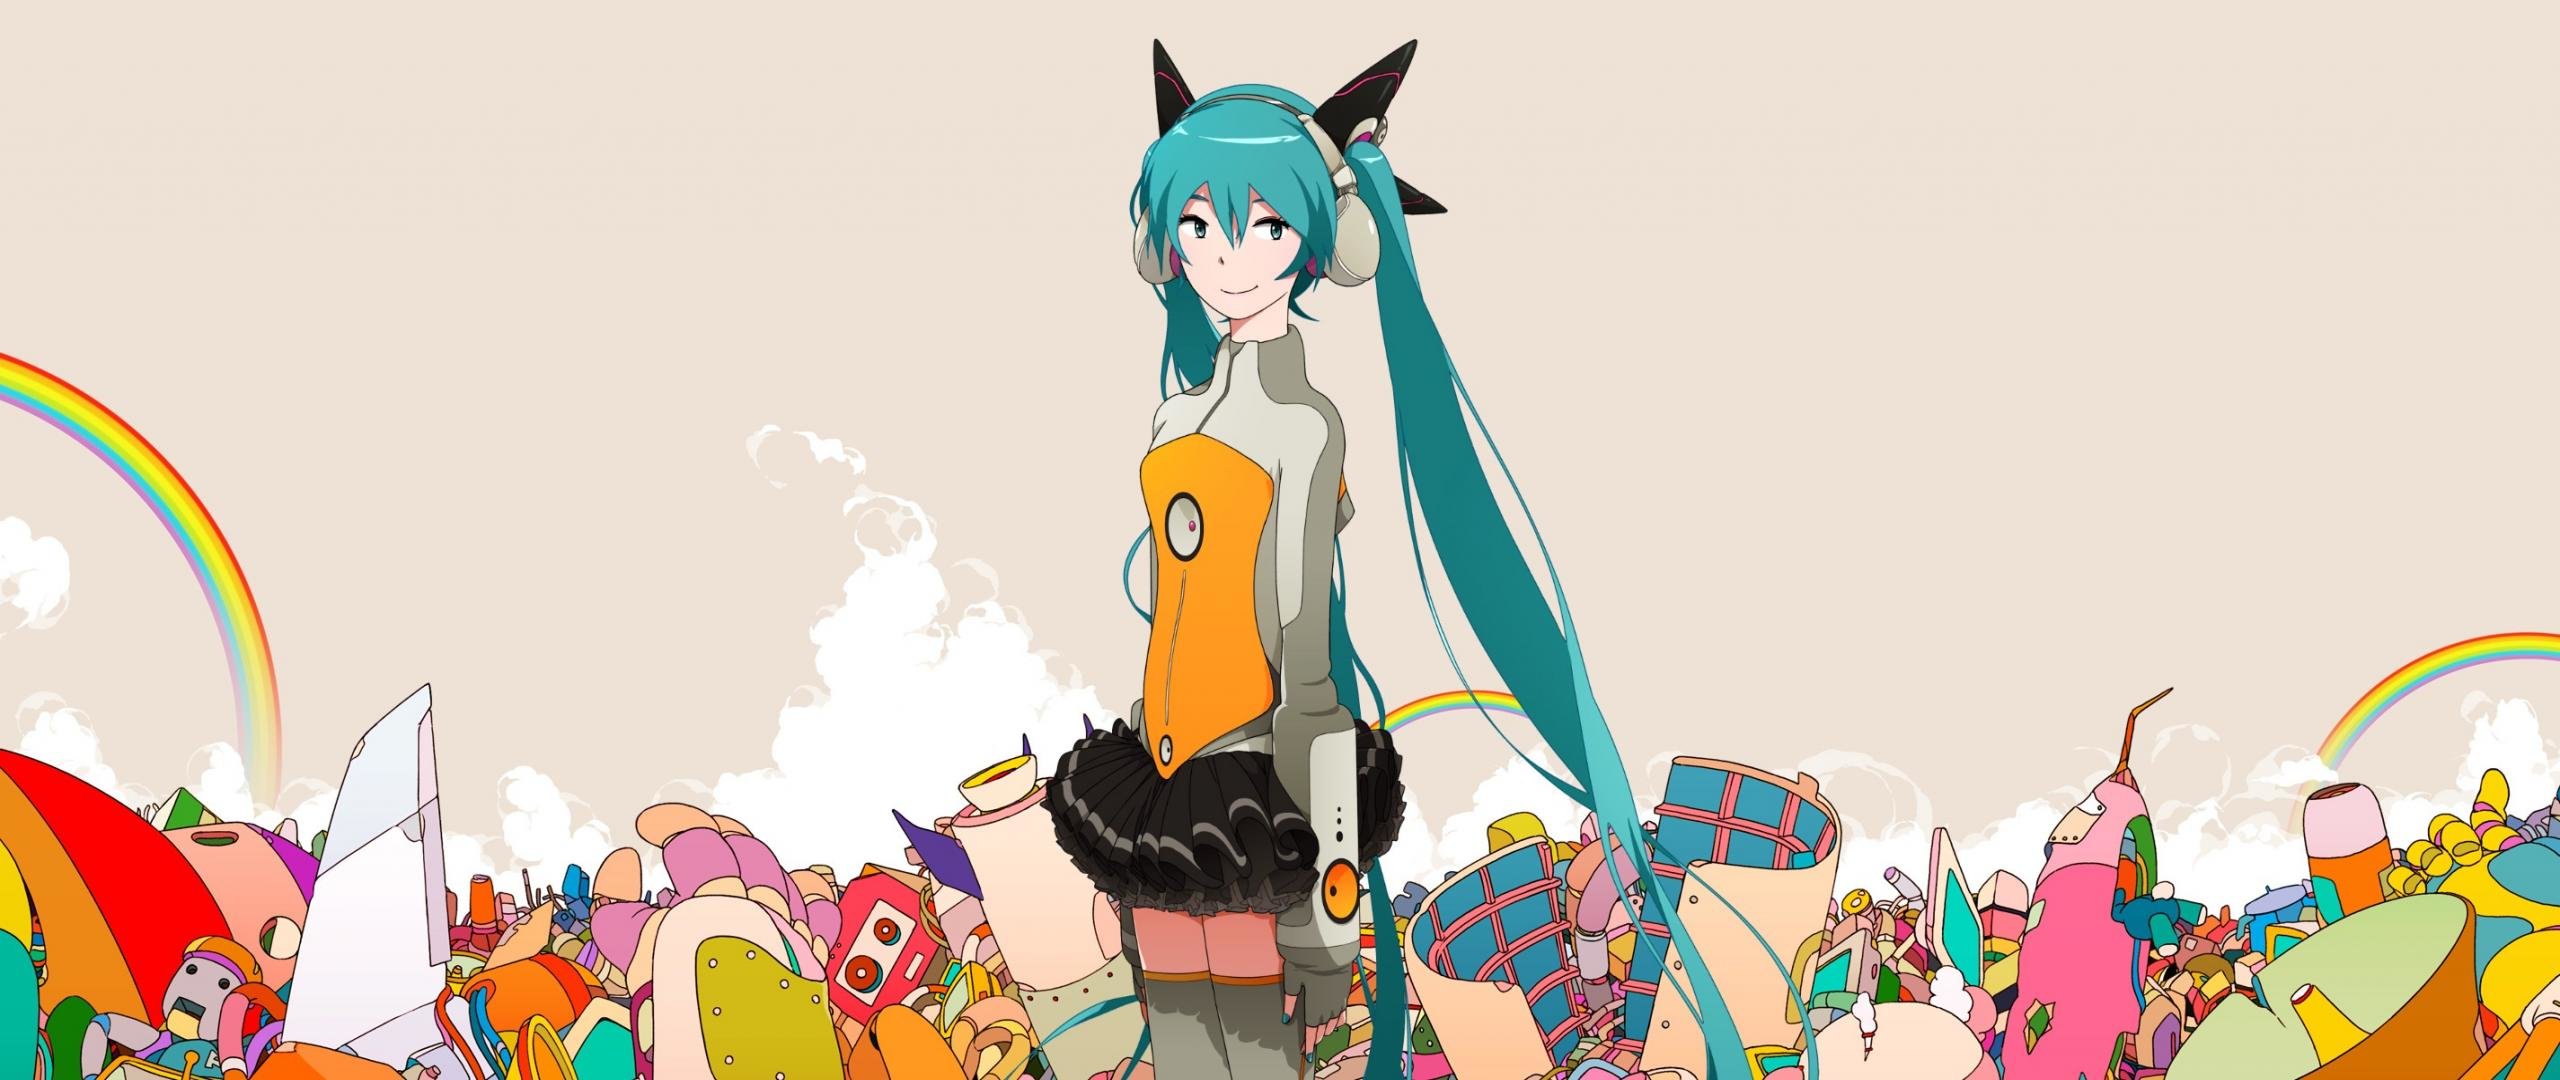 Free download Hatsune Miku background ID:3495 hd 2560x1080 for computer